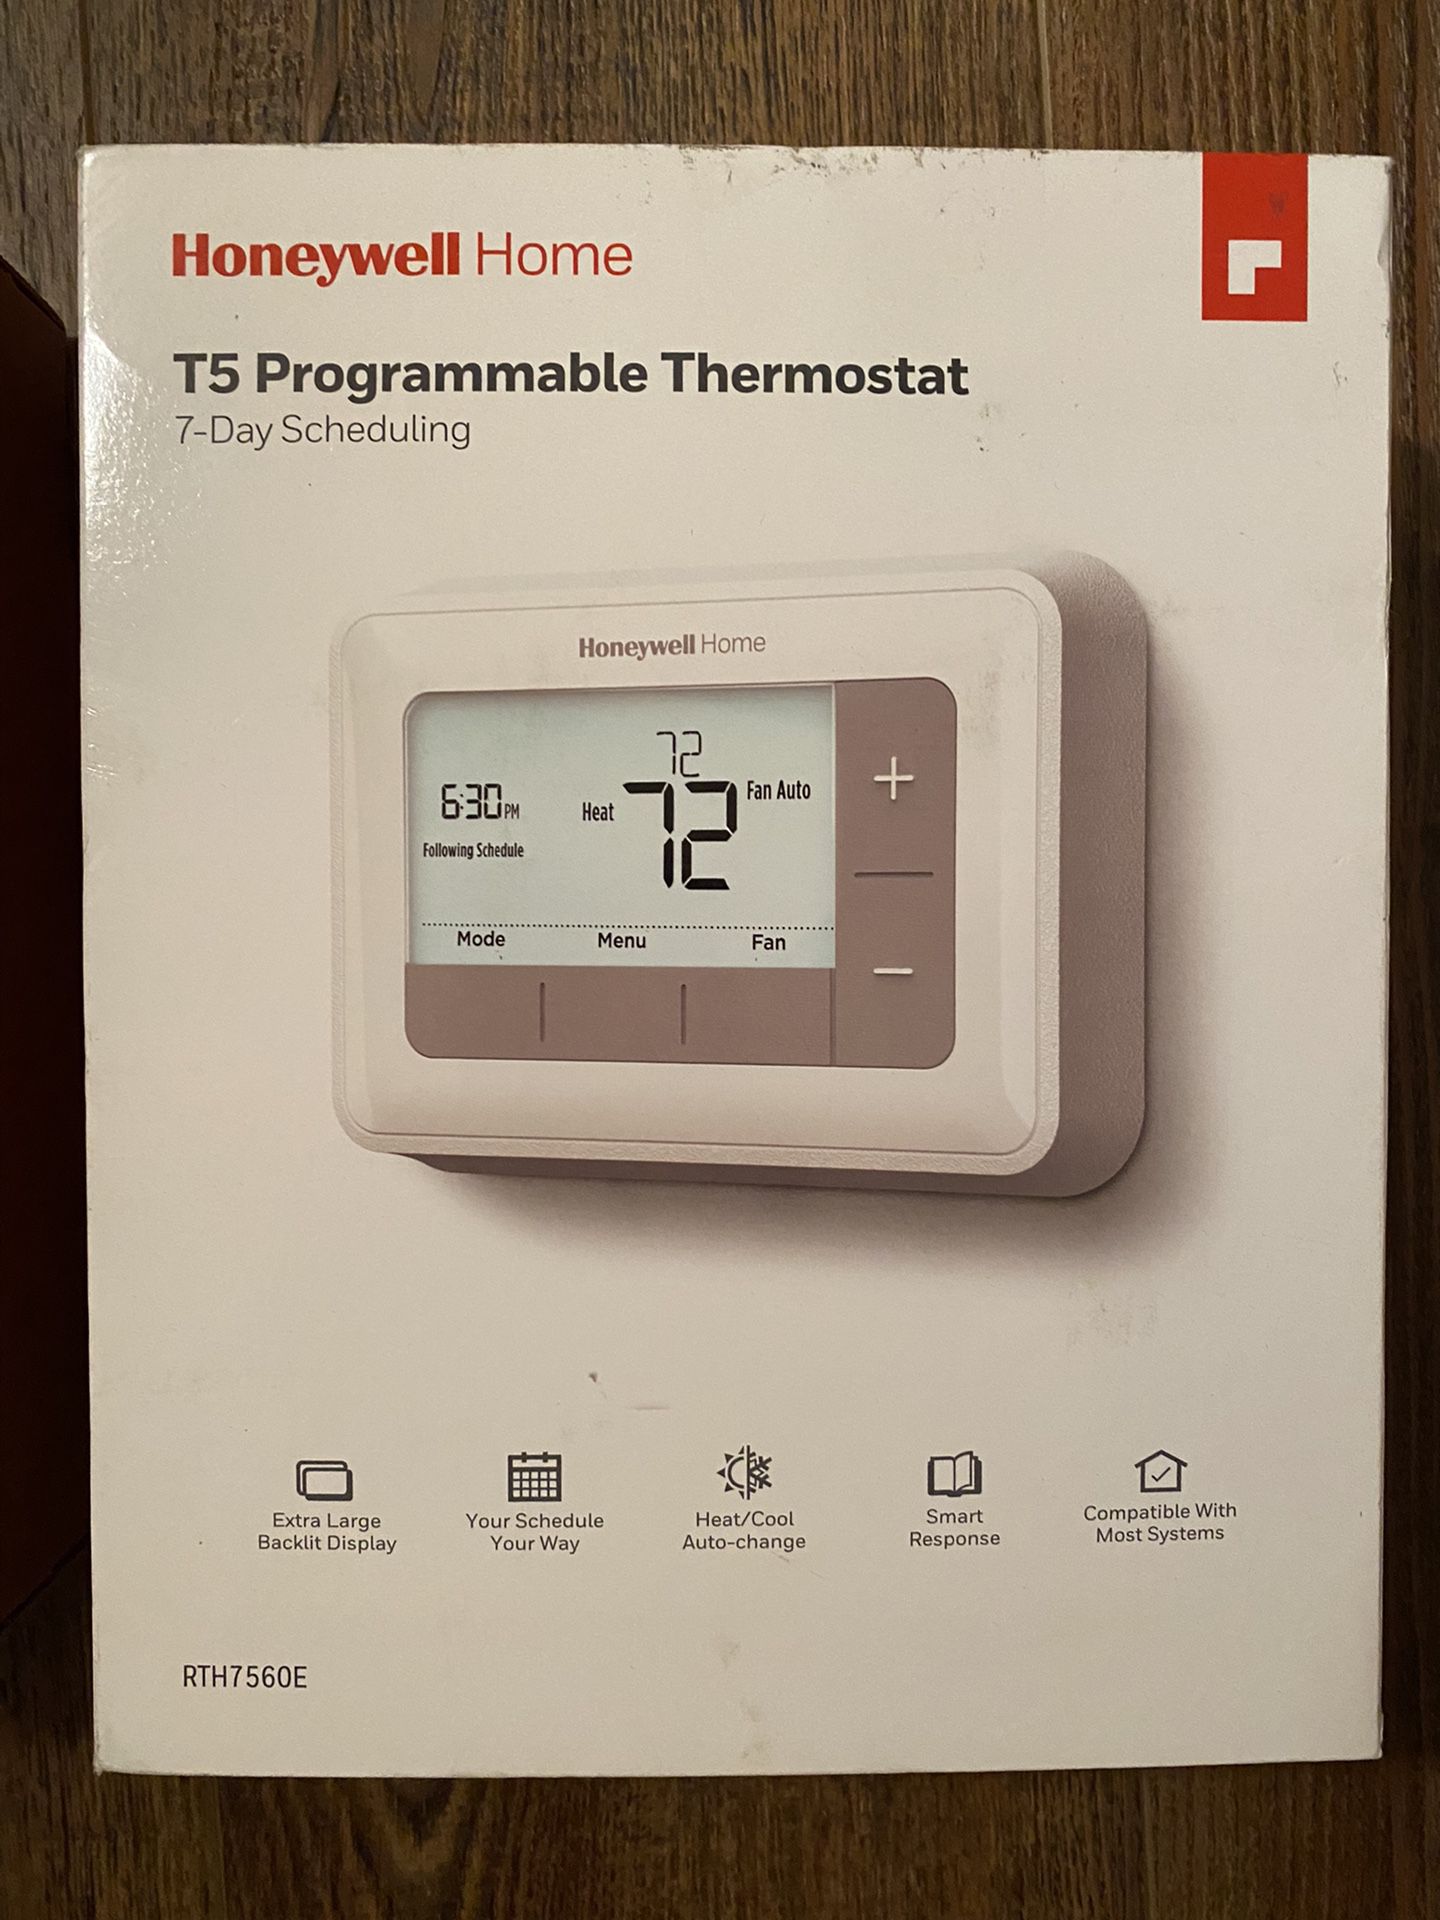 Honeywell Home T5 7 Day Scheduling Programmable Thermostat